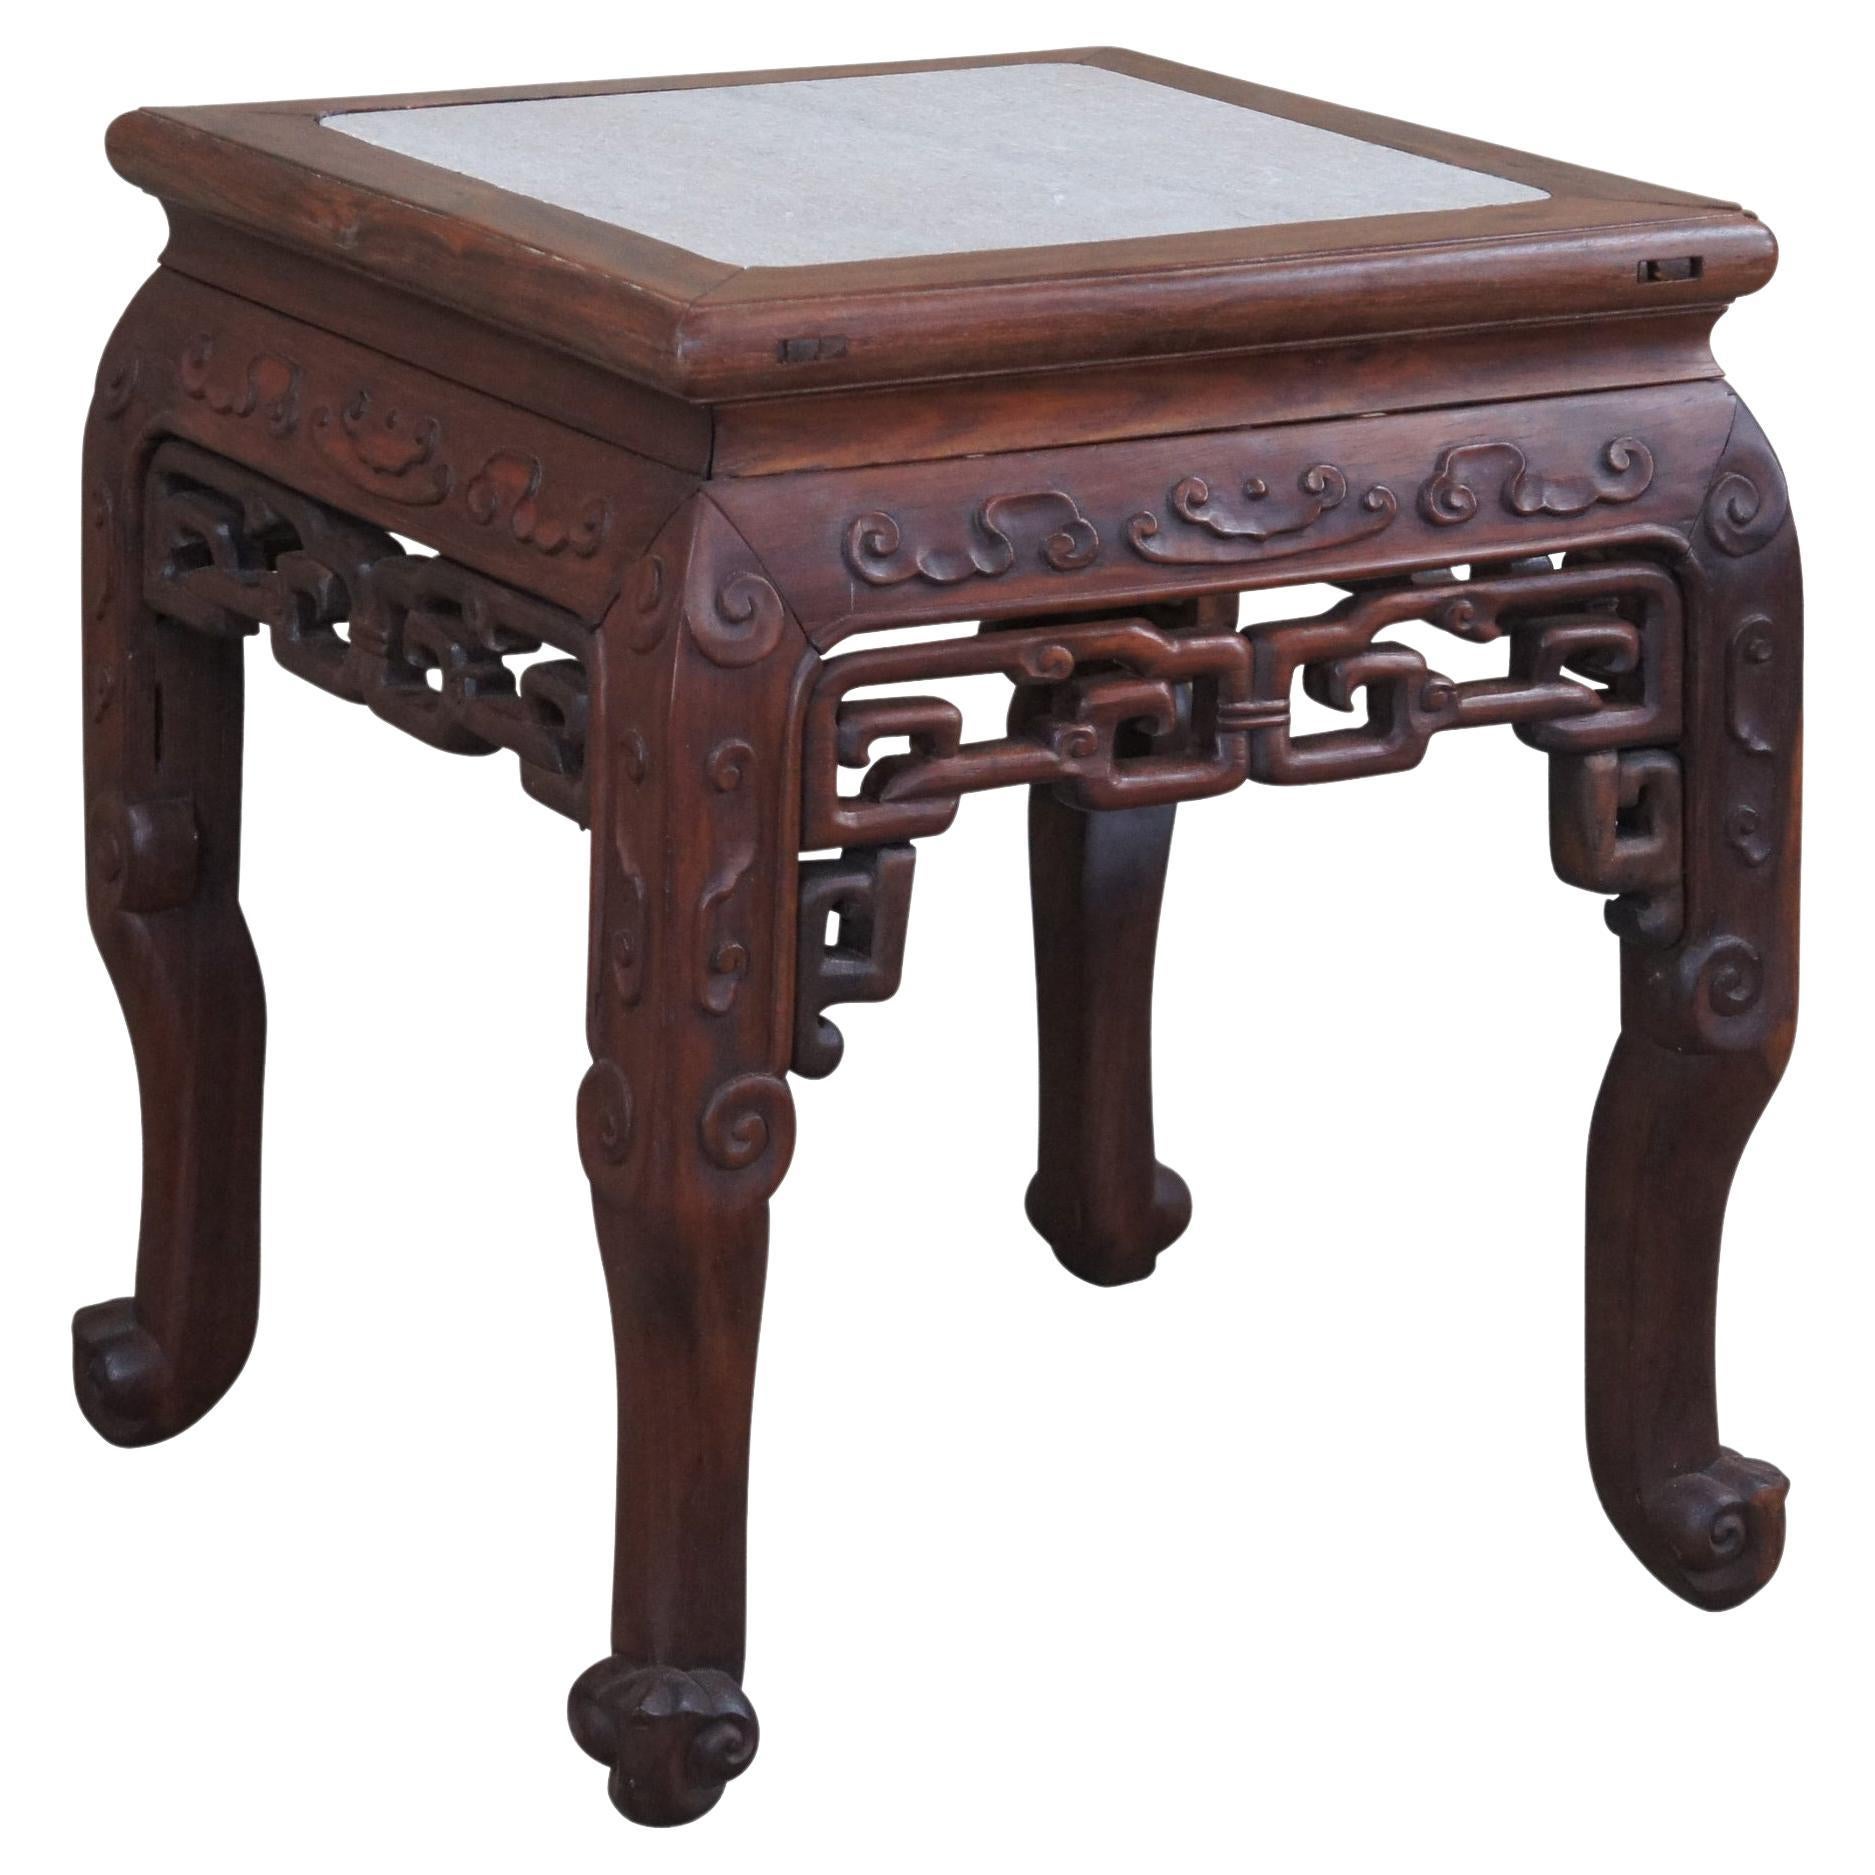 Antique Chinese Rosewood Carved Marble Top Side Table Stool Plant Stand Pedestal For Sale